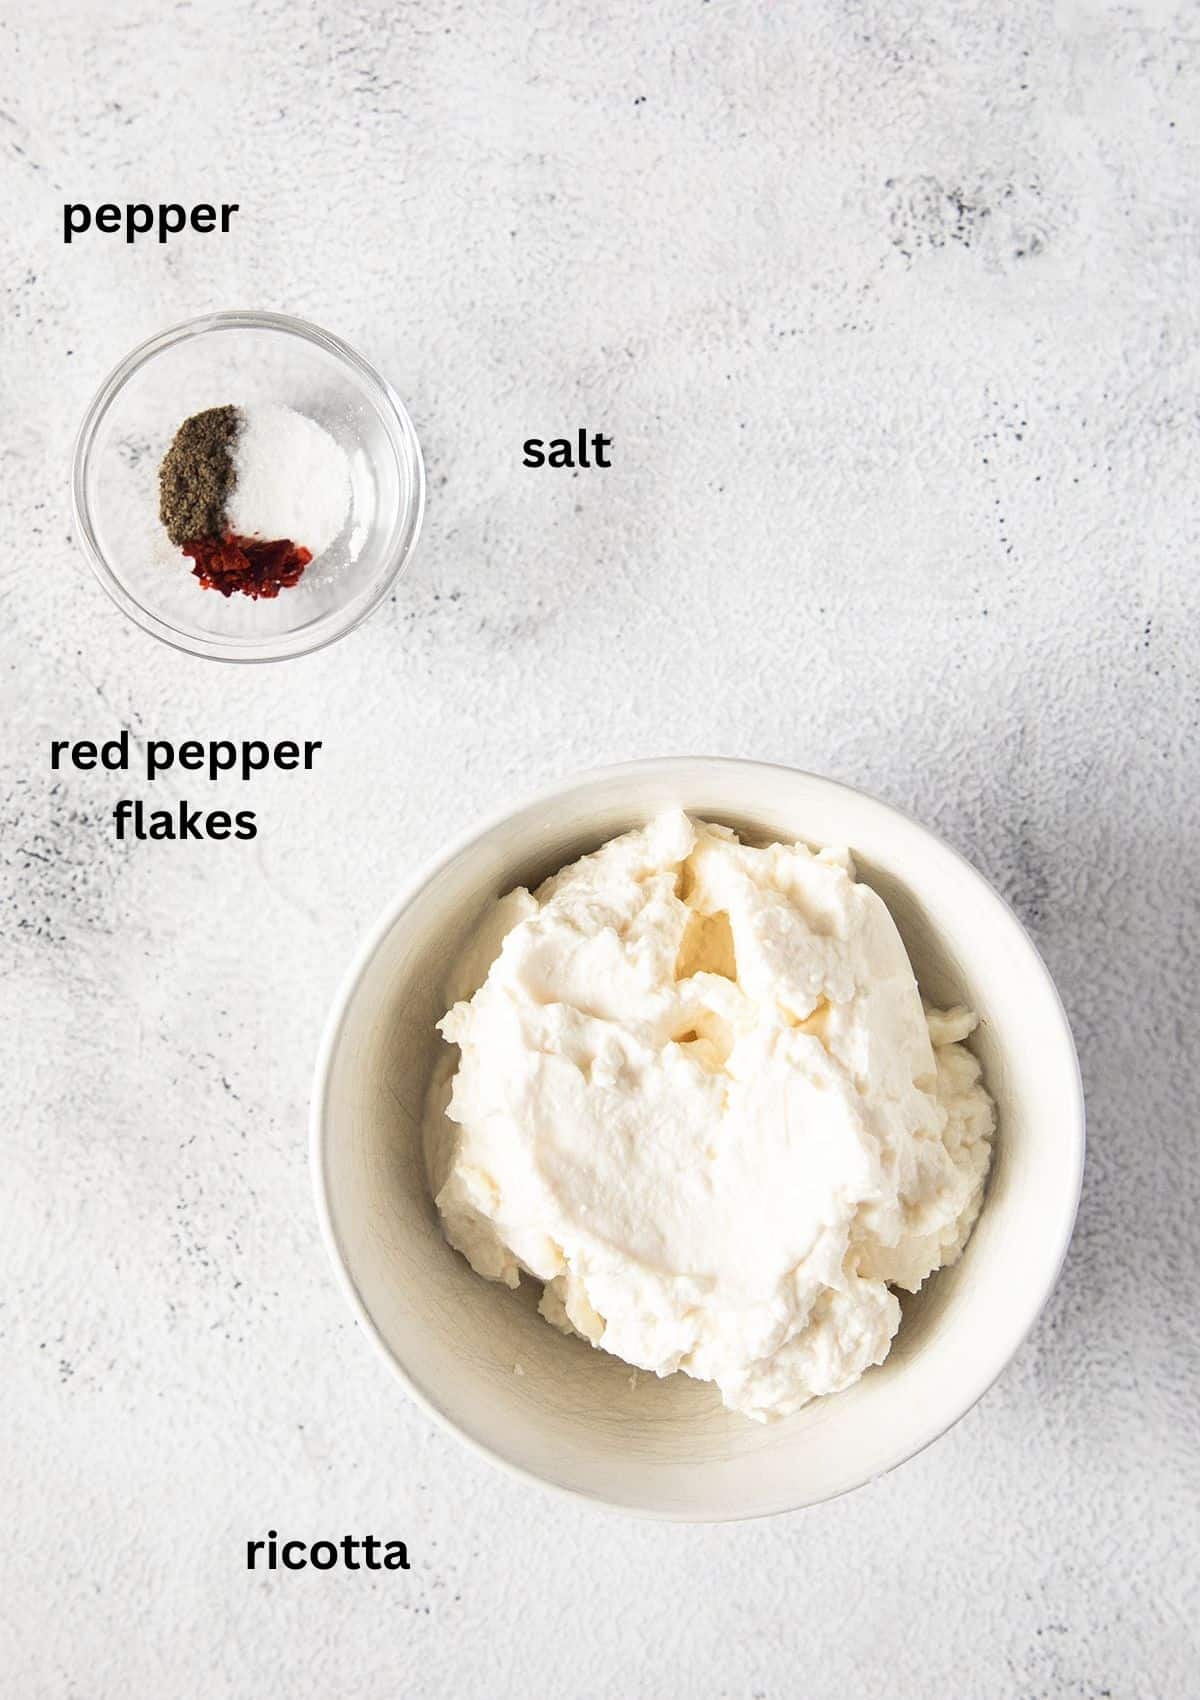 bowls with ricotta, salt, pepper, and red pepper flakes, all ingredients are labeled.